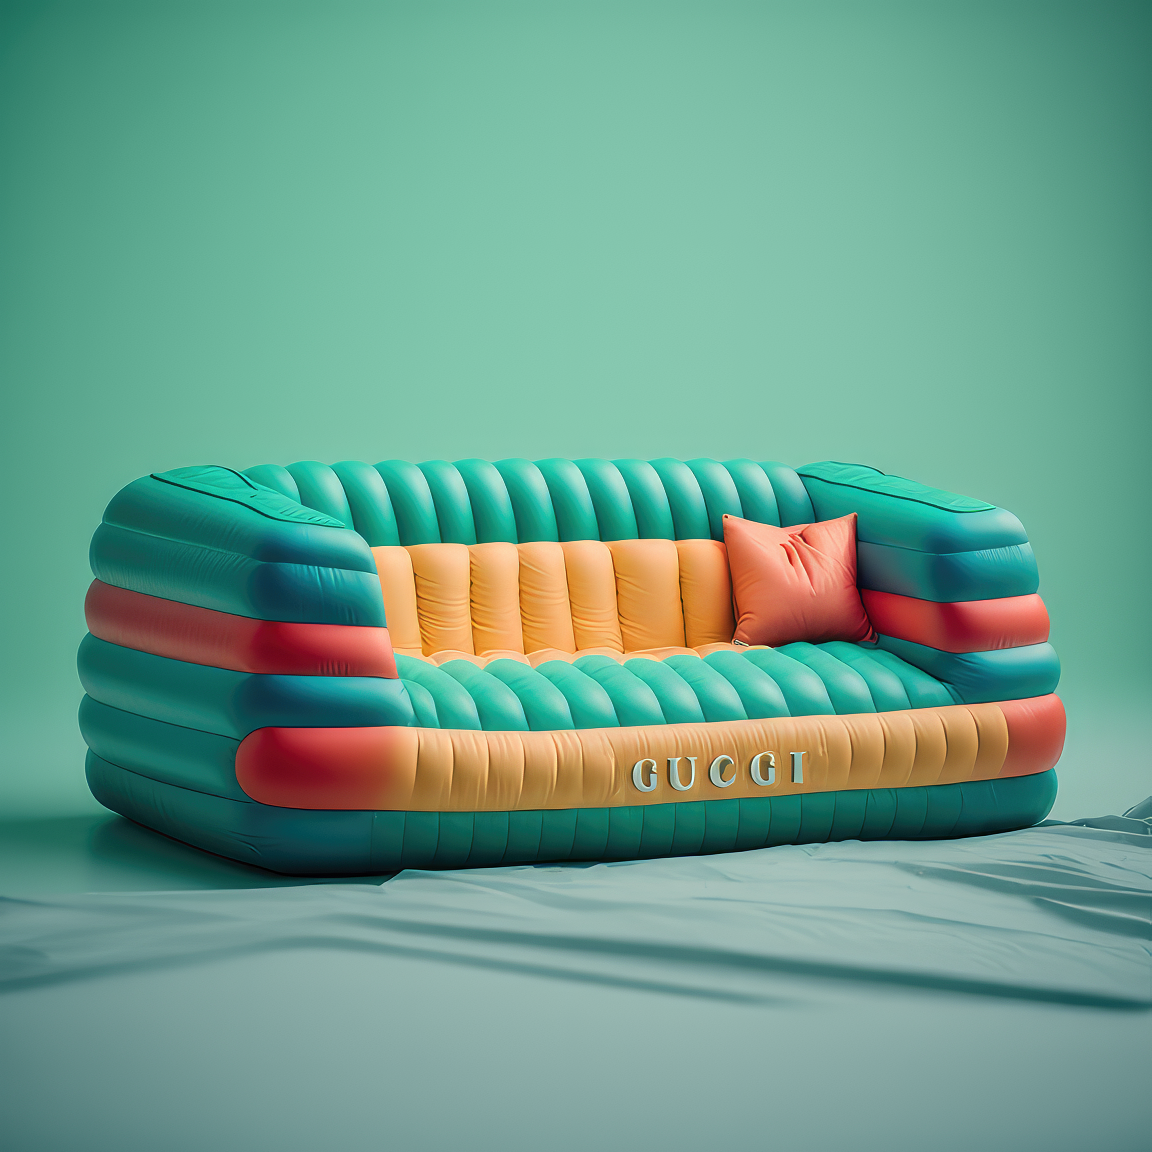 tonycncp_Gucci_luxury_inflatable_couch_color-coded_insane_detai_61e8e7b7-de27-4f7a-bb87-cef8fce17761-gigapixel-standard-scale-2_00x.png